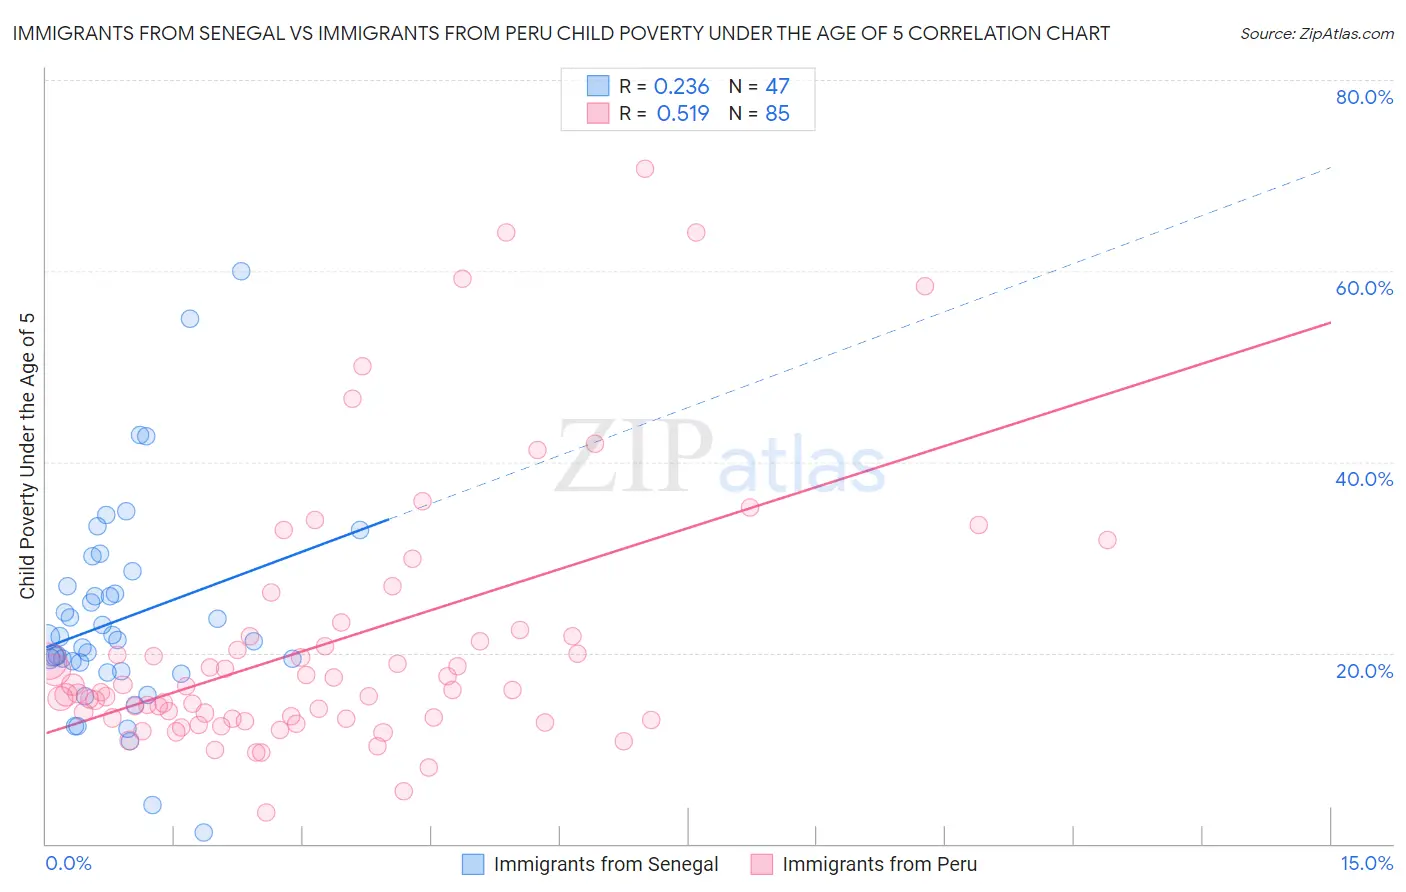 Immigrants from Senegal vs Immigrants from Peru Child Poverty Under the Age of 5